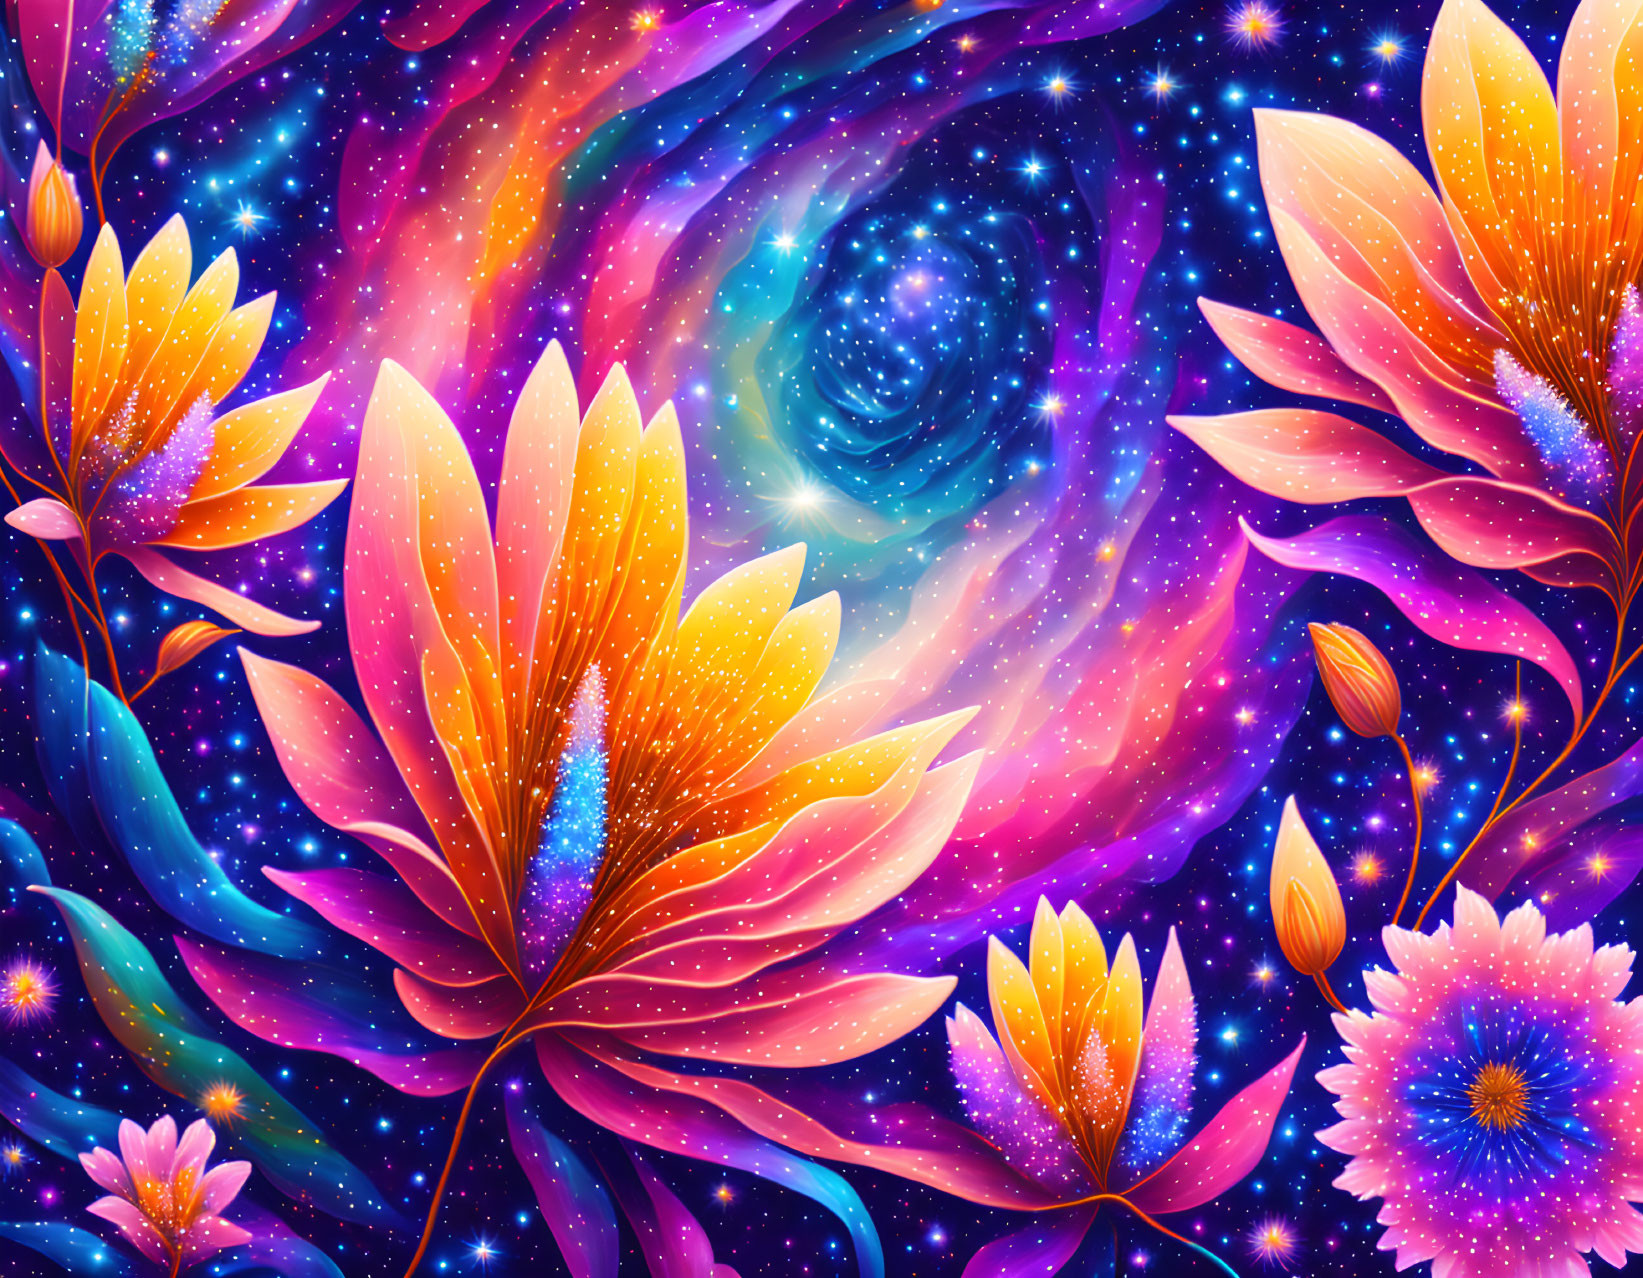 Colorful cosmic scene with swirling galaxies and stylized flowers in purple and orange hues